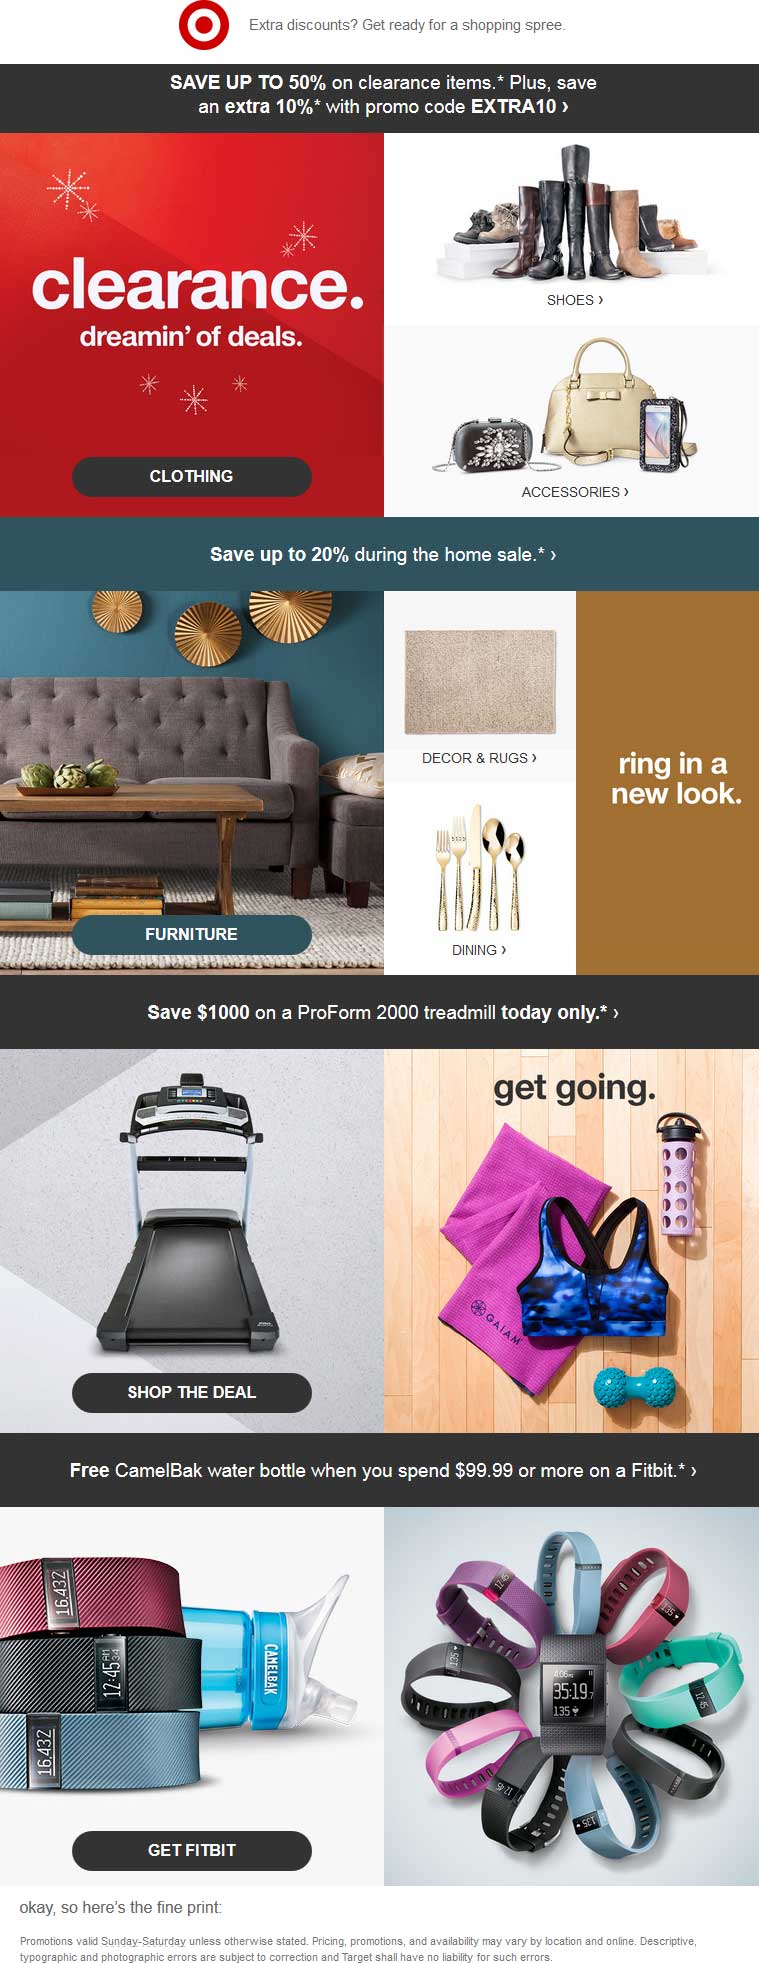 target-july-2020-coupons-and-promo-codes